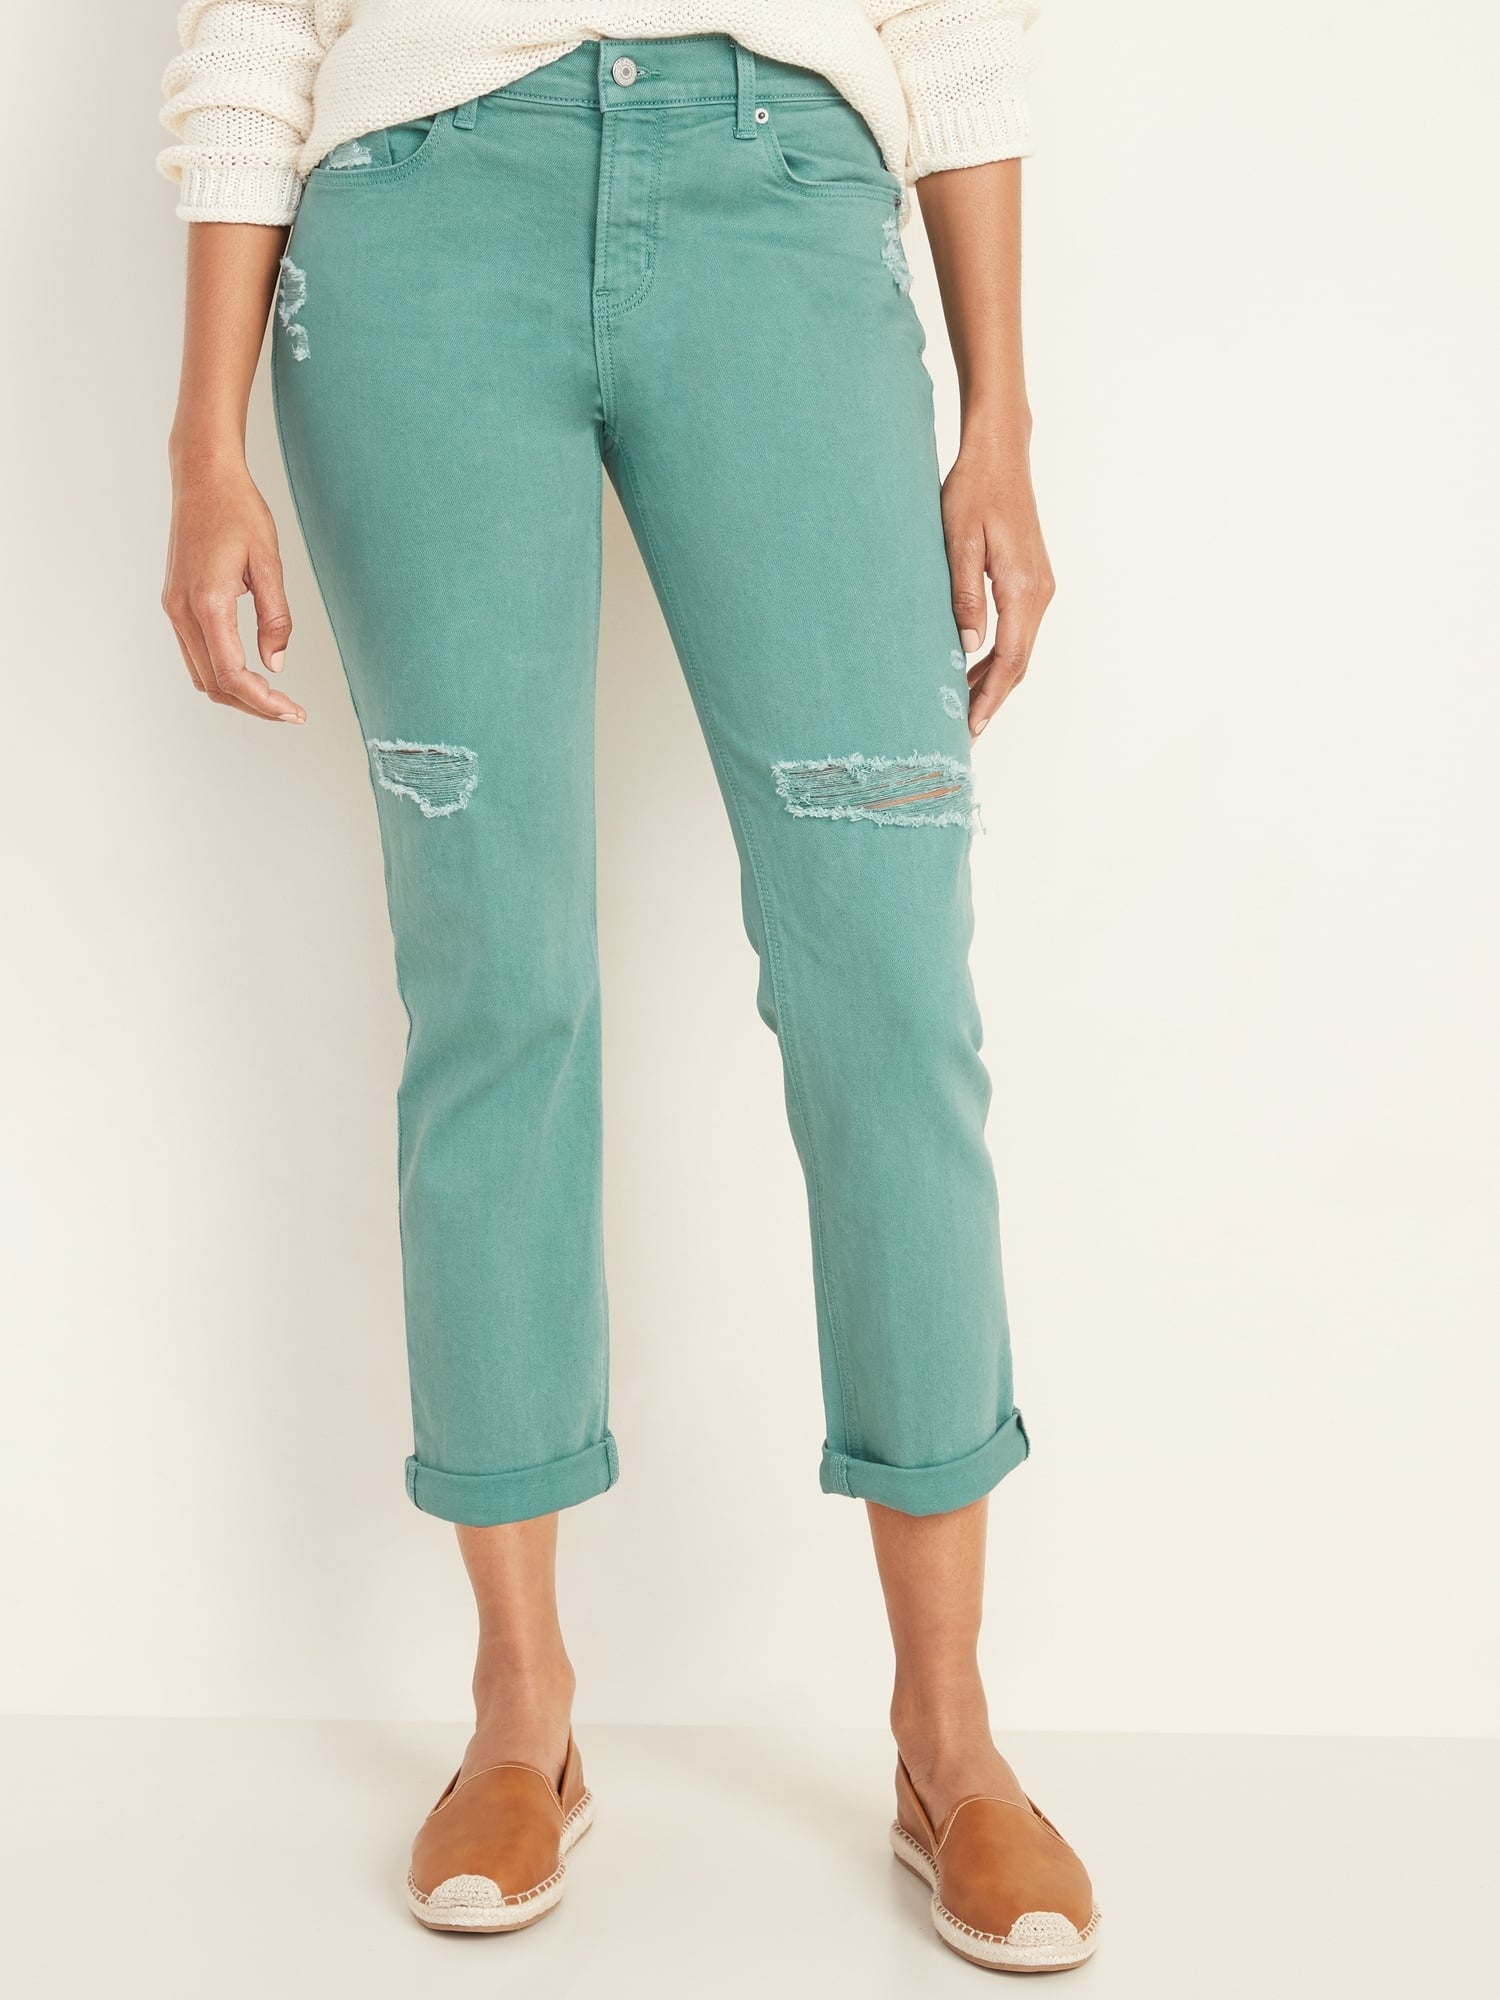 old navy two tone jeans